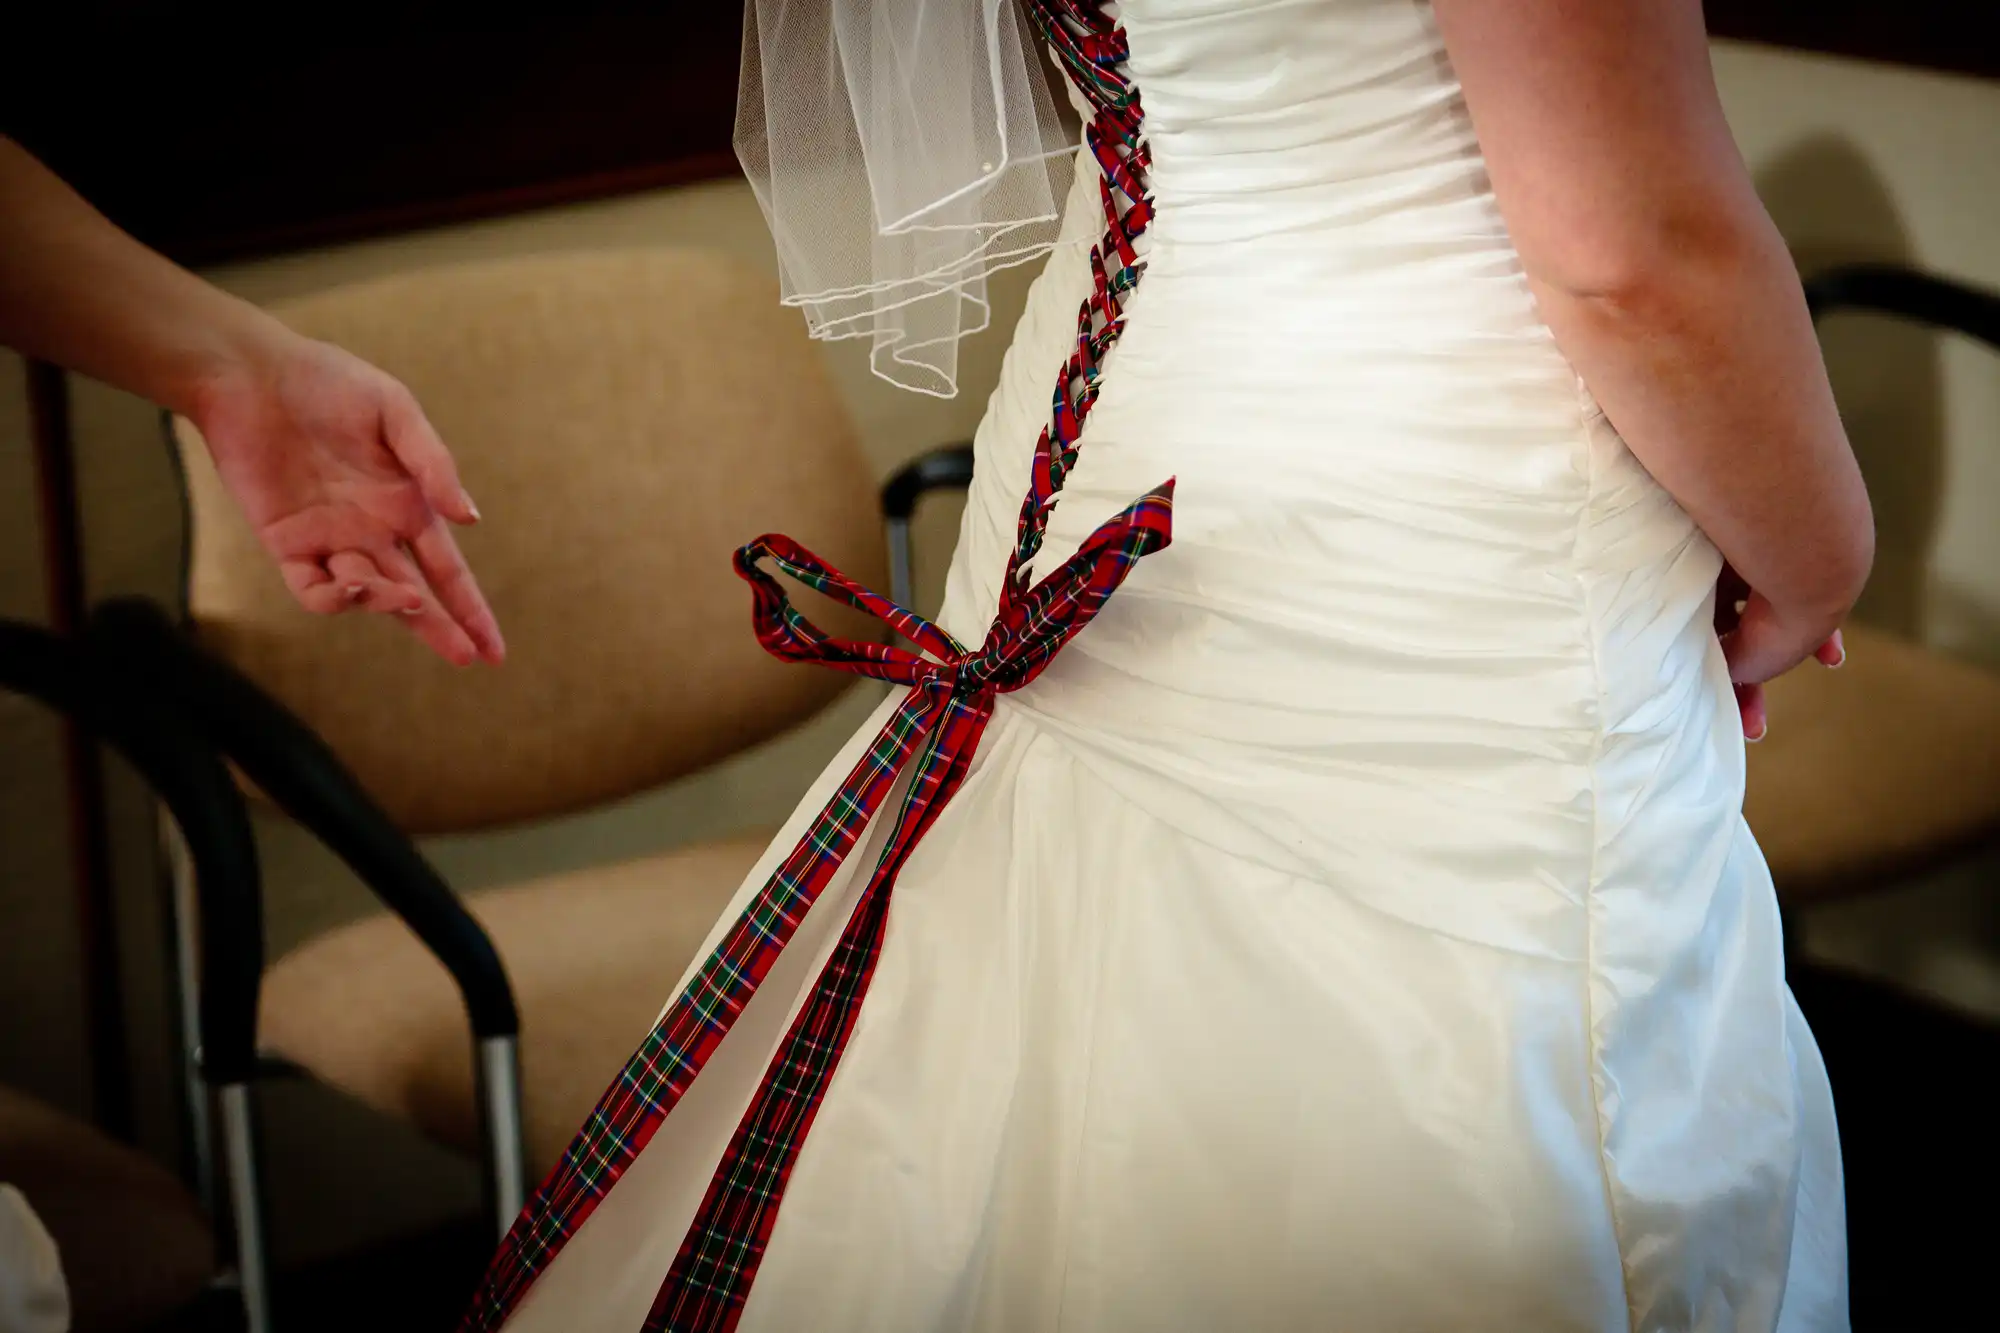 A bride in a white dress with a tartan ribbon tied at her waist extends her hand towards someone off-camera.